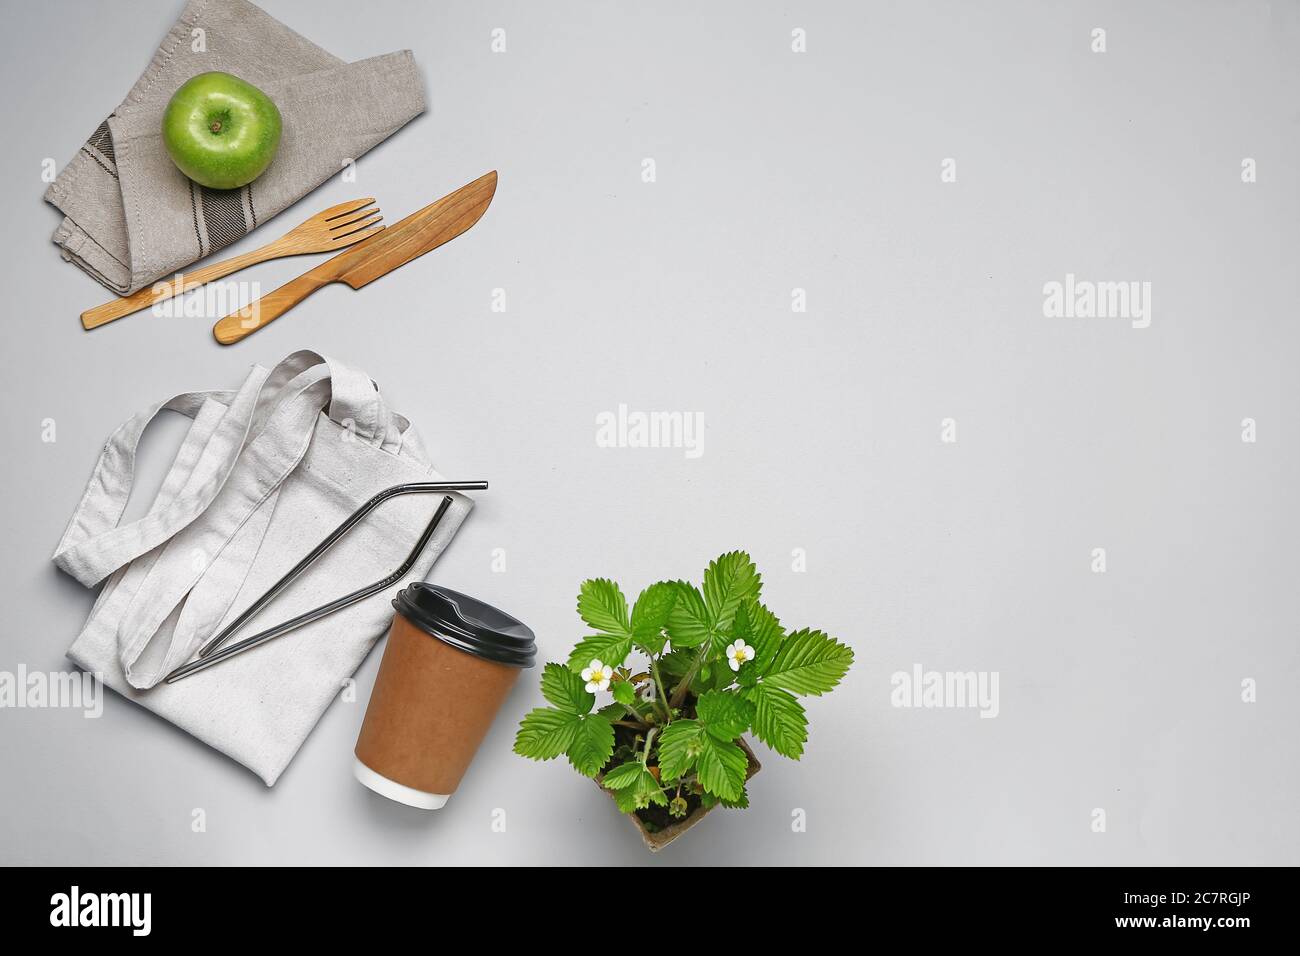 Composition with eco bag on light background Stock Photo